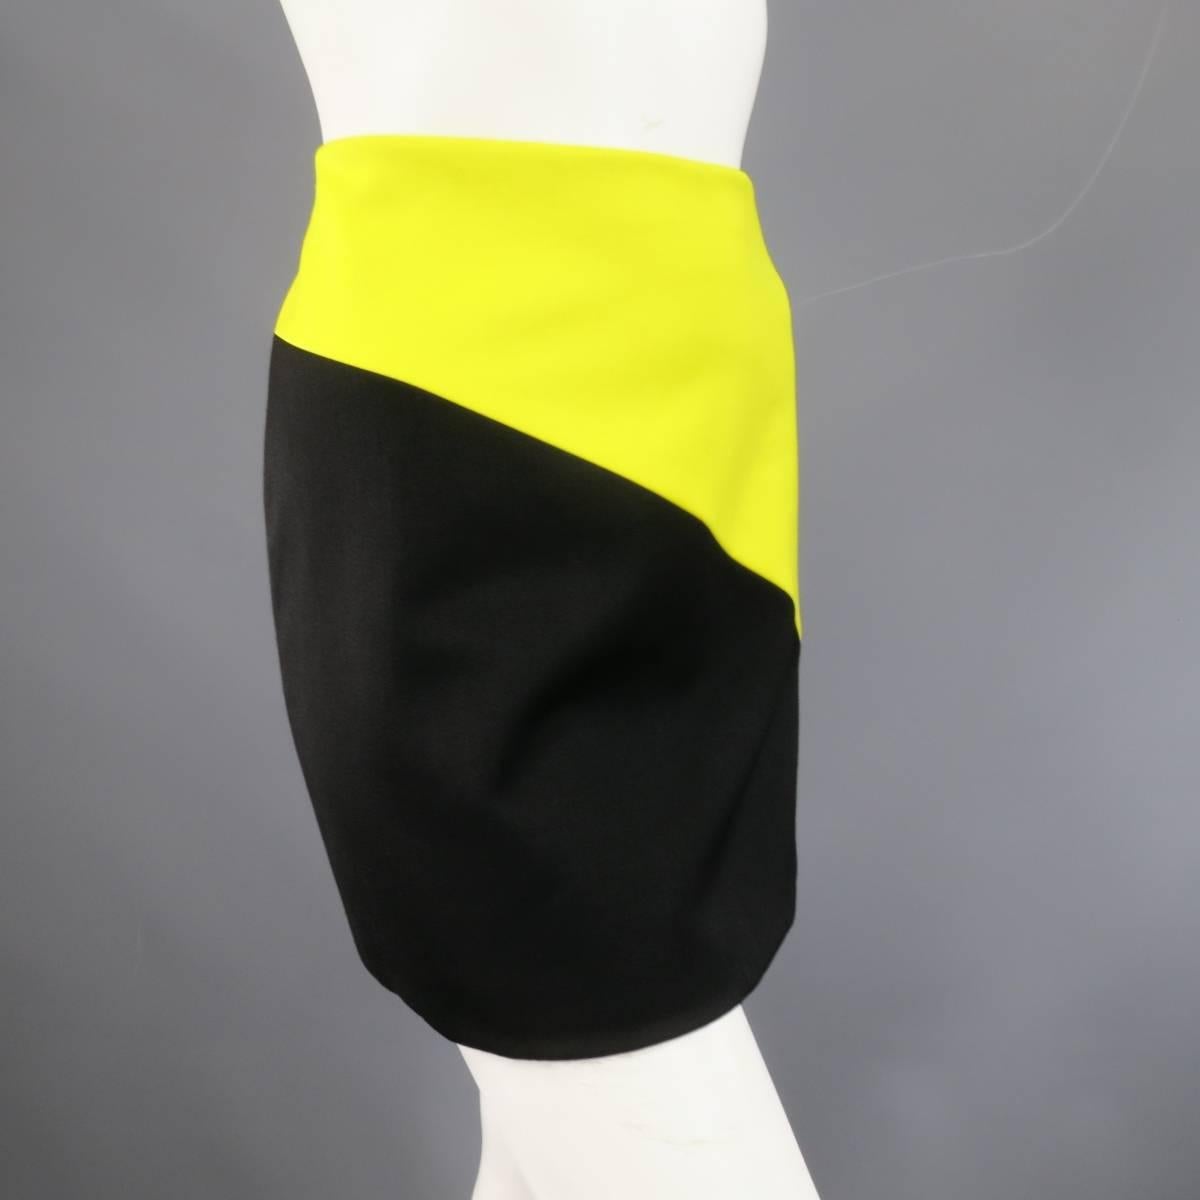 Chic DOLCE & GABBANA mini skirt in a structured virgin wool cashmere blend featuring diagonal black and vibrant yellow color block panels. Made in Italy.
 
Excellent Pre-Owned Condition.
Marked: IT 42
 
Measurements:
 
Waist: 32 in.
Hip: 38